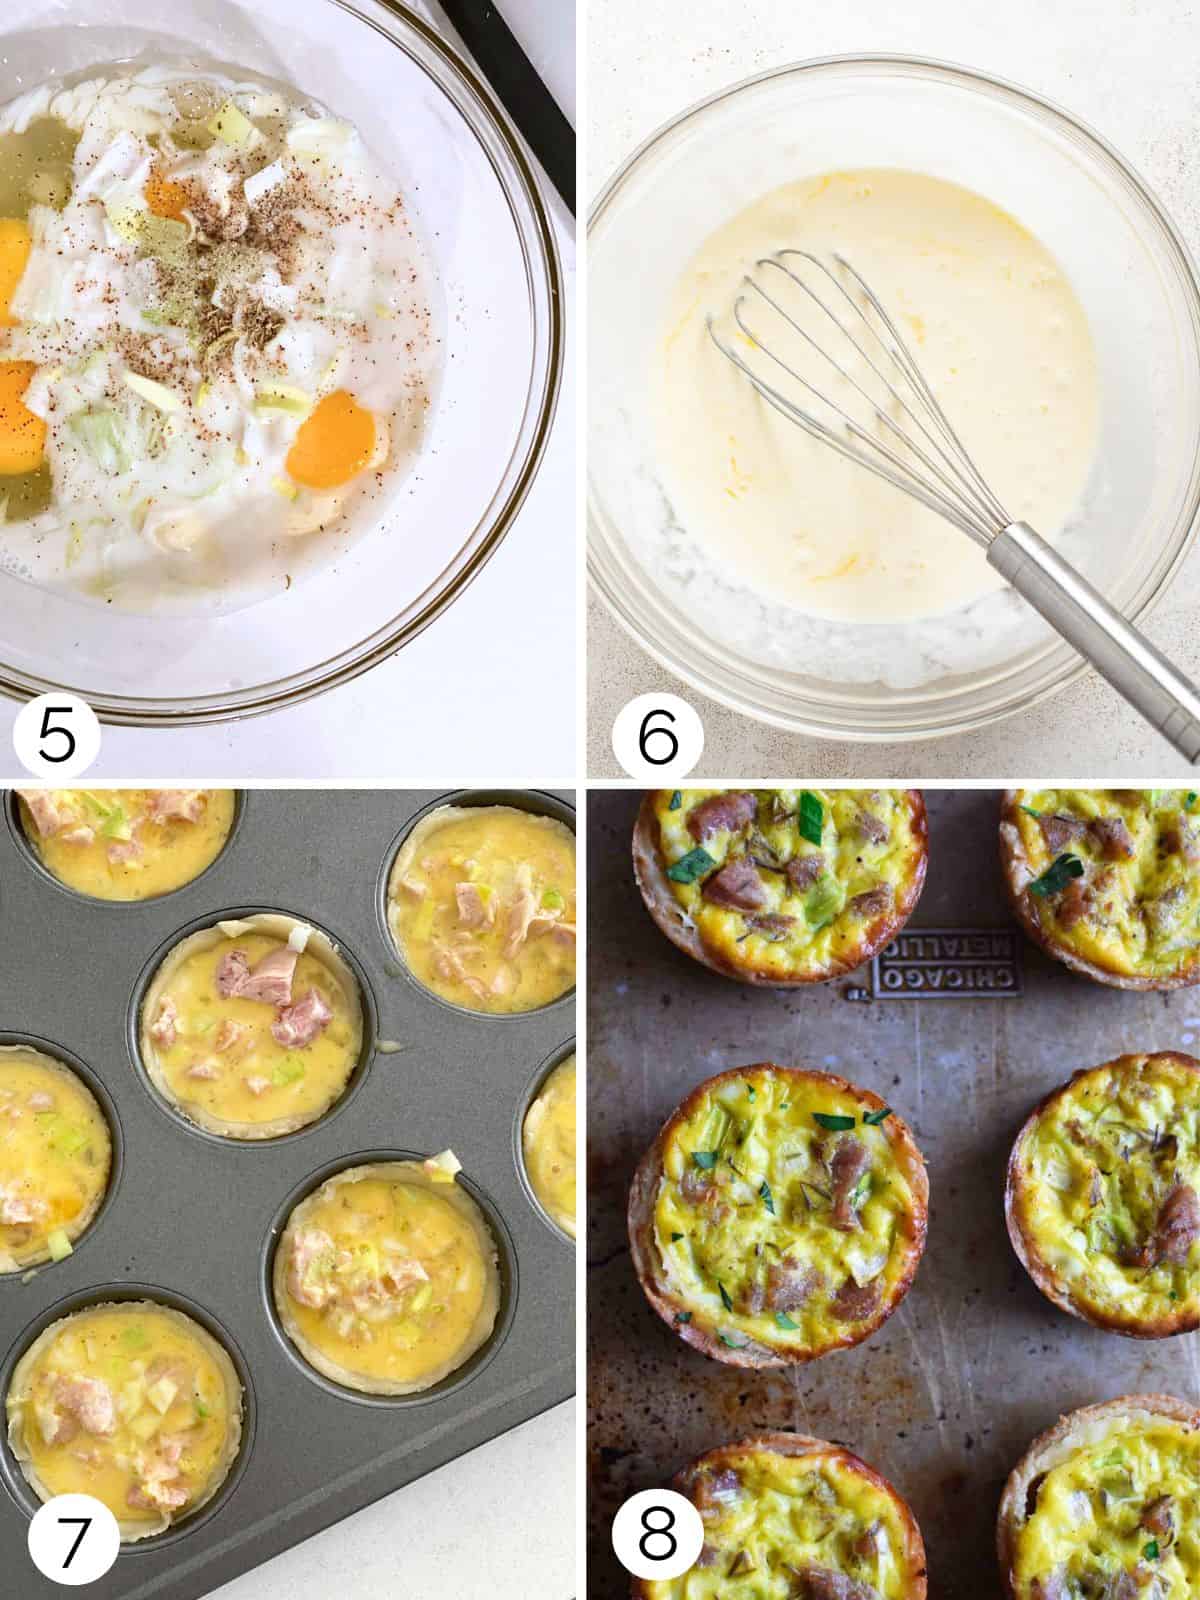 Process of making the filling for dairy free mini quiche and baking them.